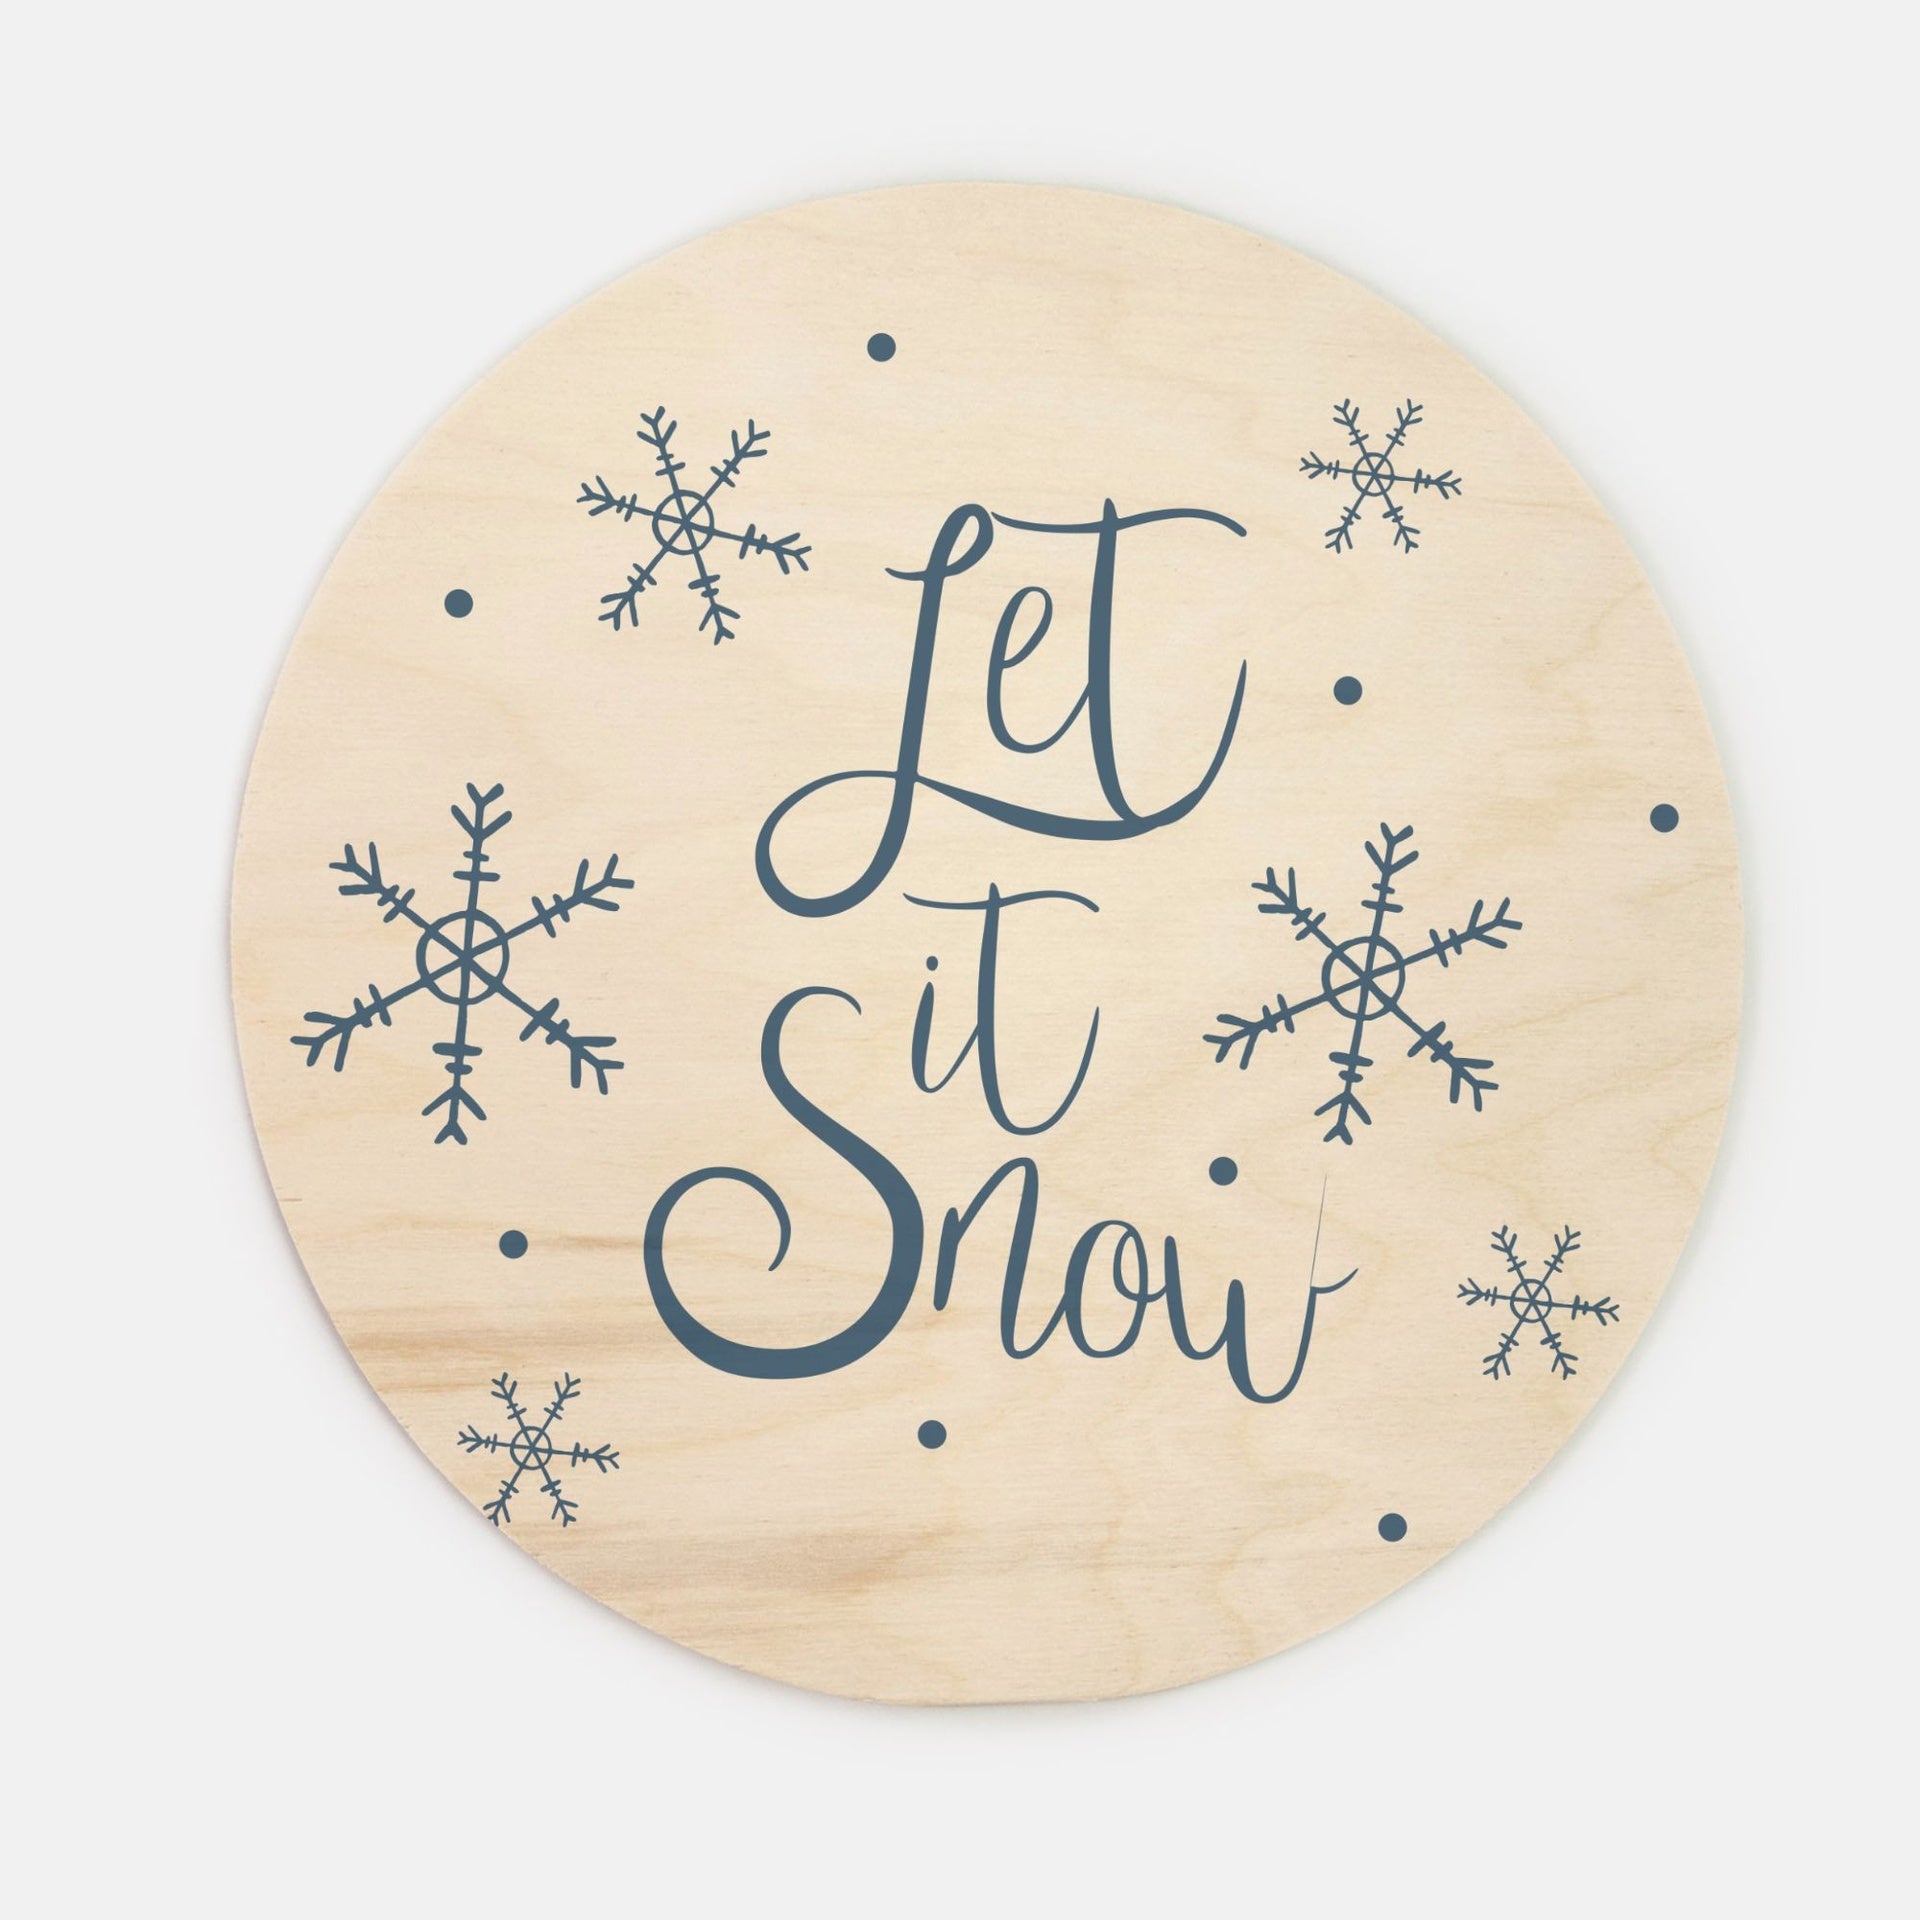 10" Round Wood Sign - Let it Snow